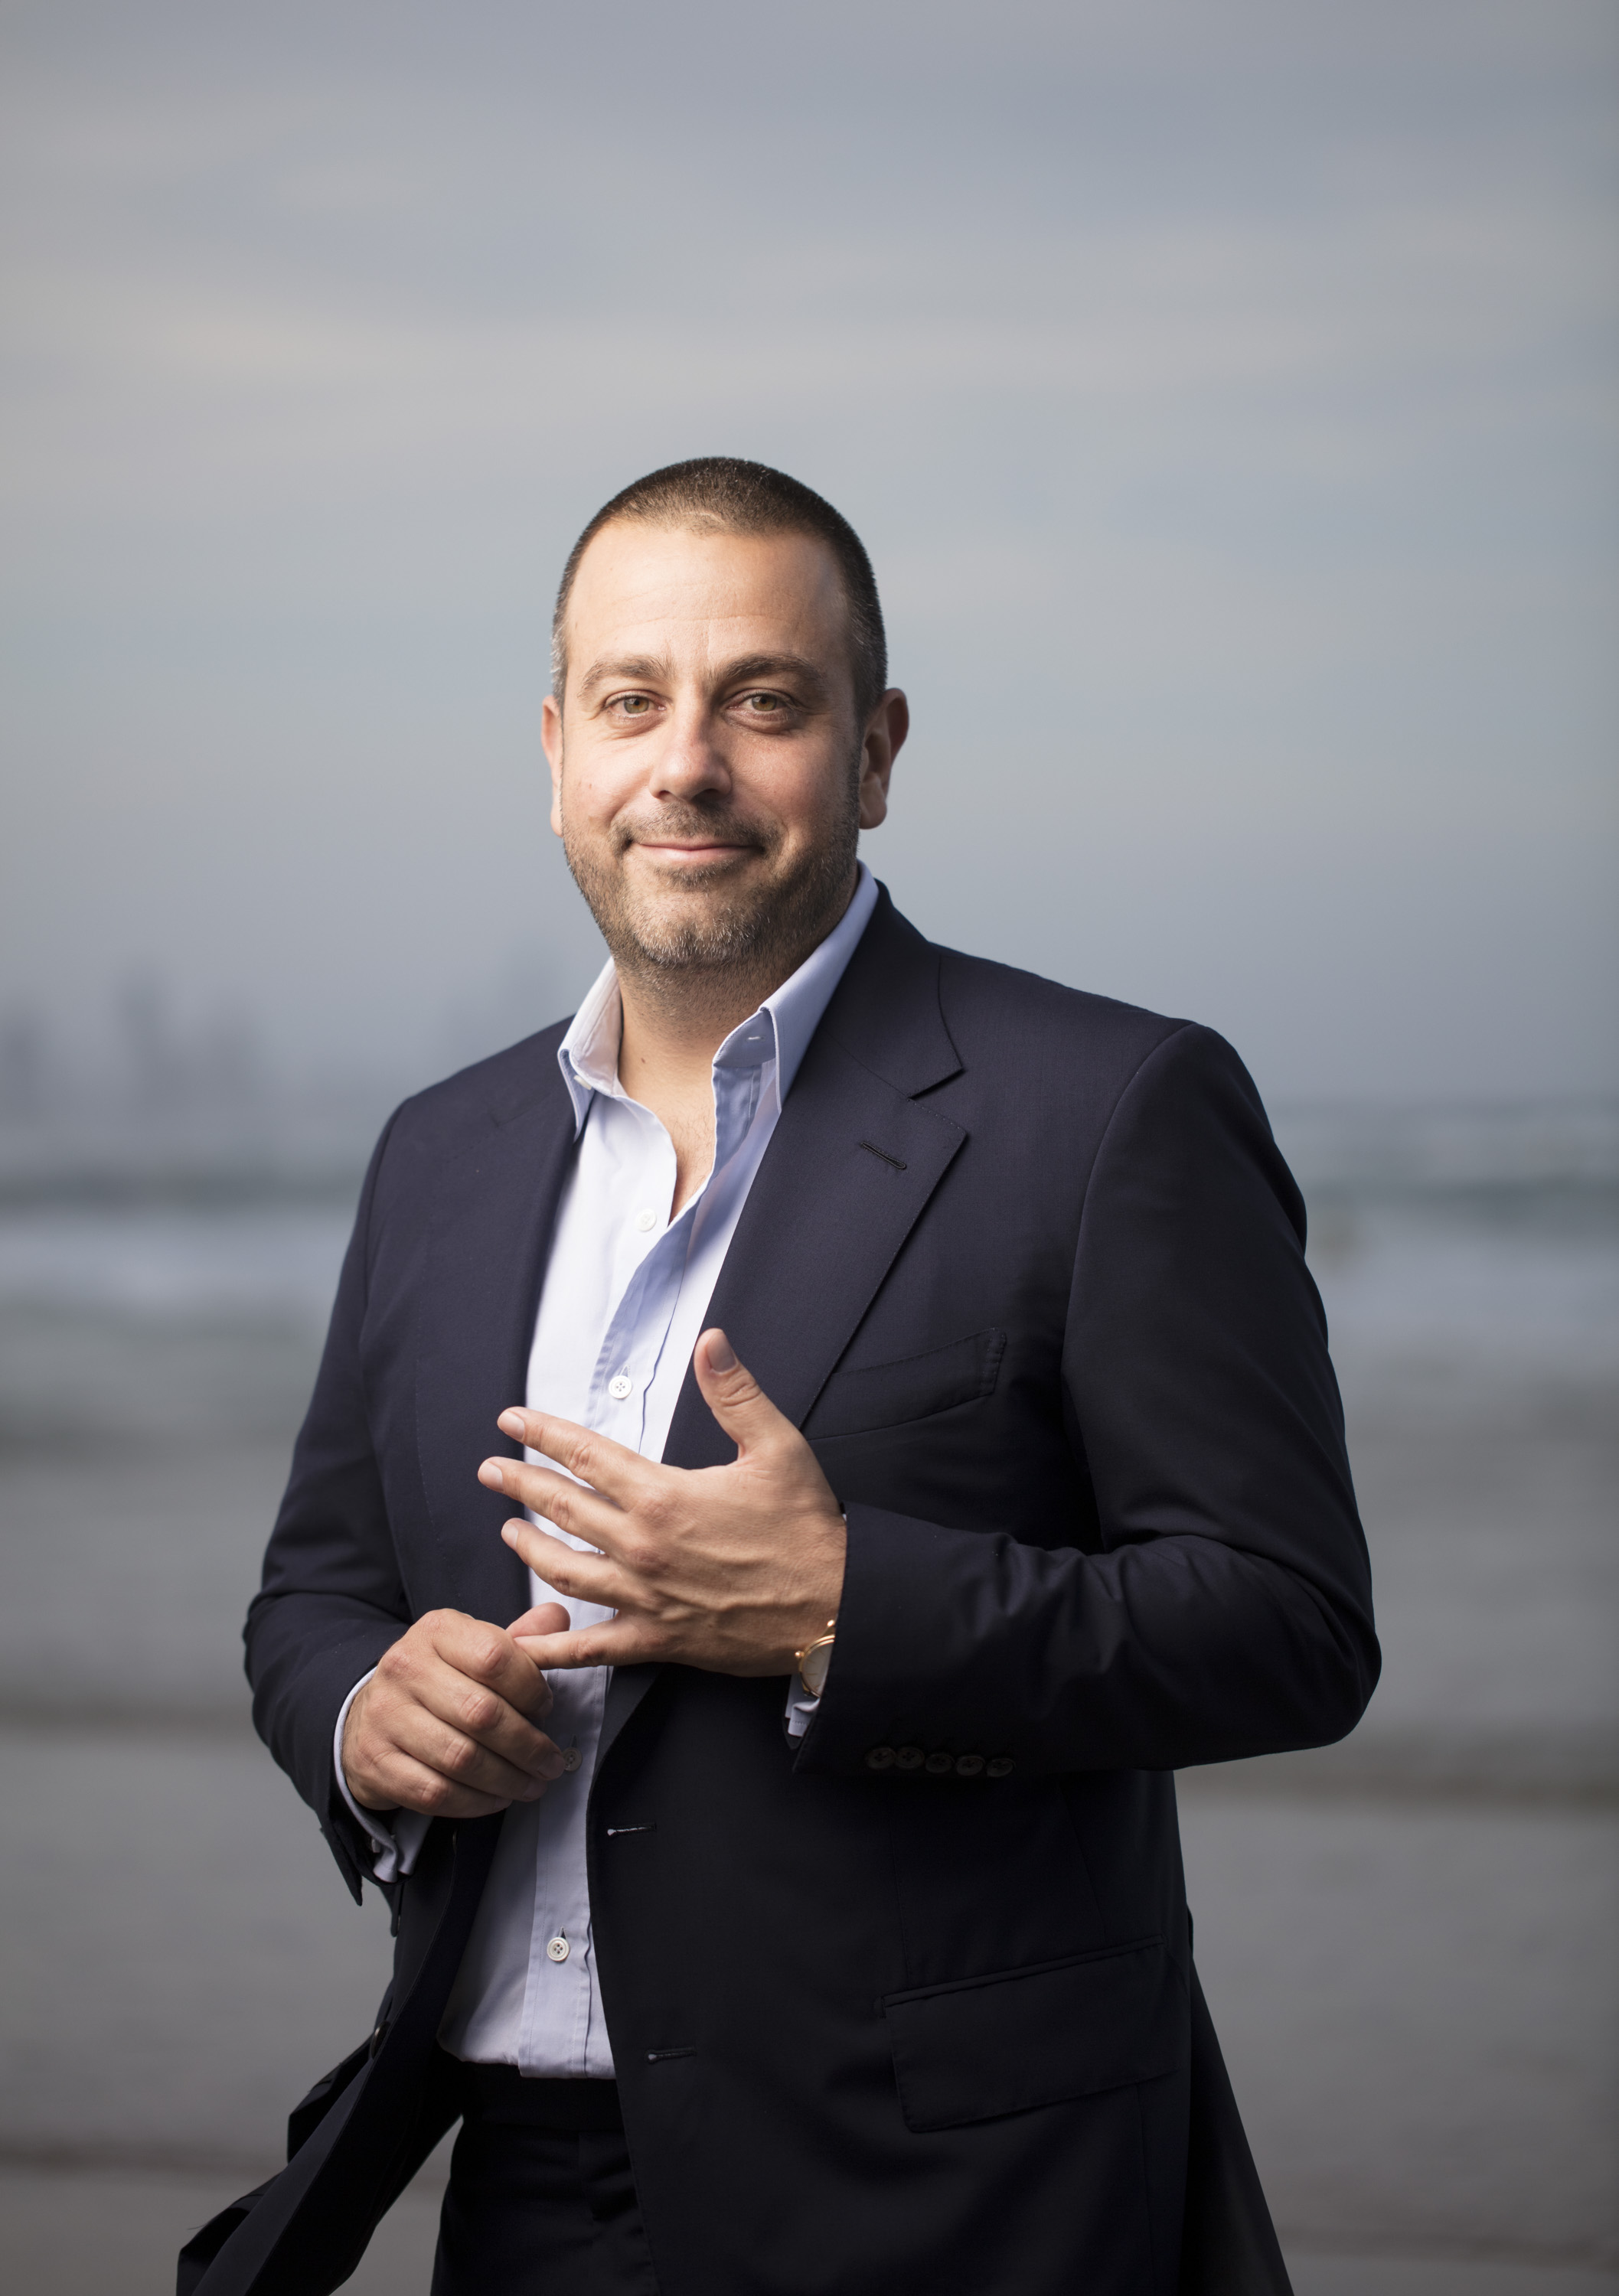  Simon Gloftis owner of Hellenika Reastaurant, photographed at Burleigh Heads on the Gold Coast for The Deal Magazine 